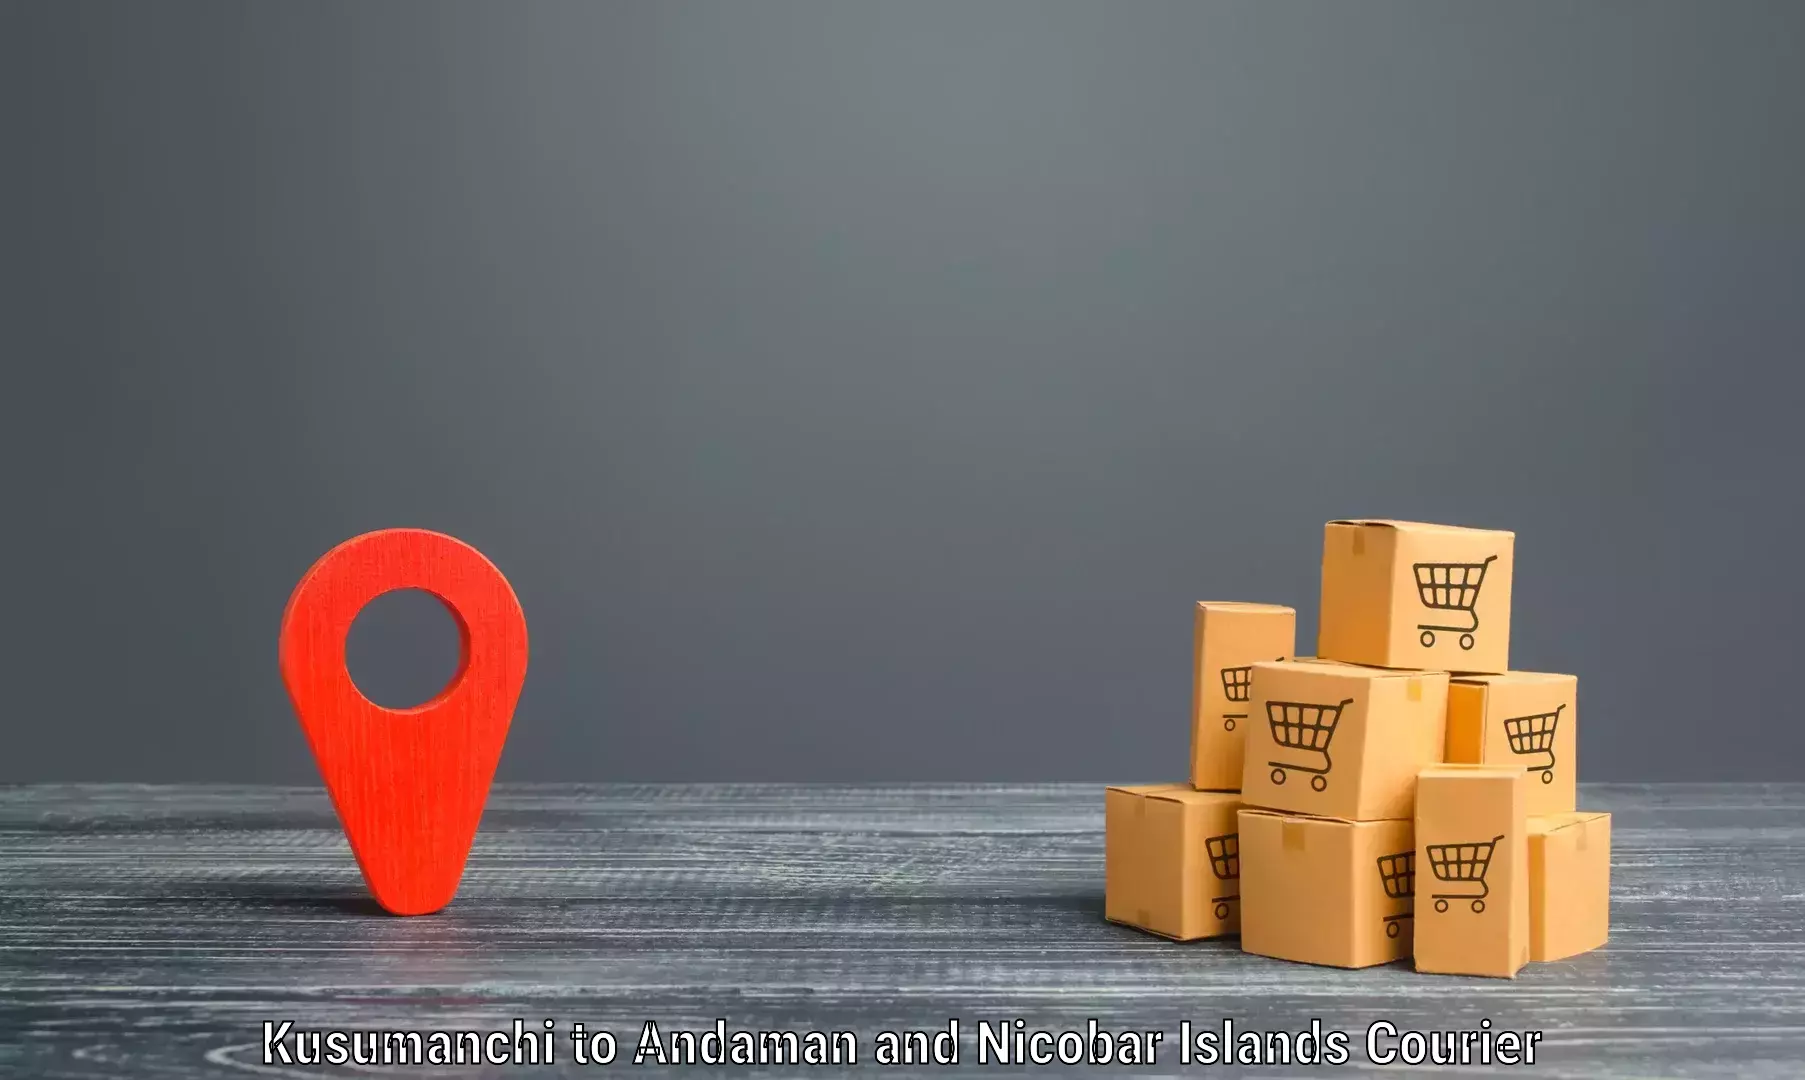 Urgent courier needs Kusumanchi to North And Middle Andaman